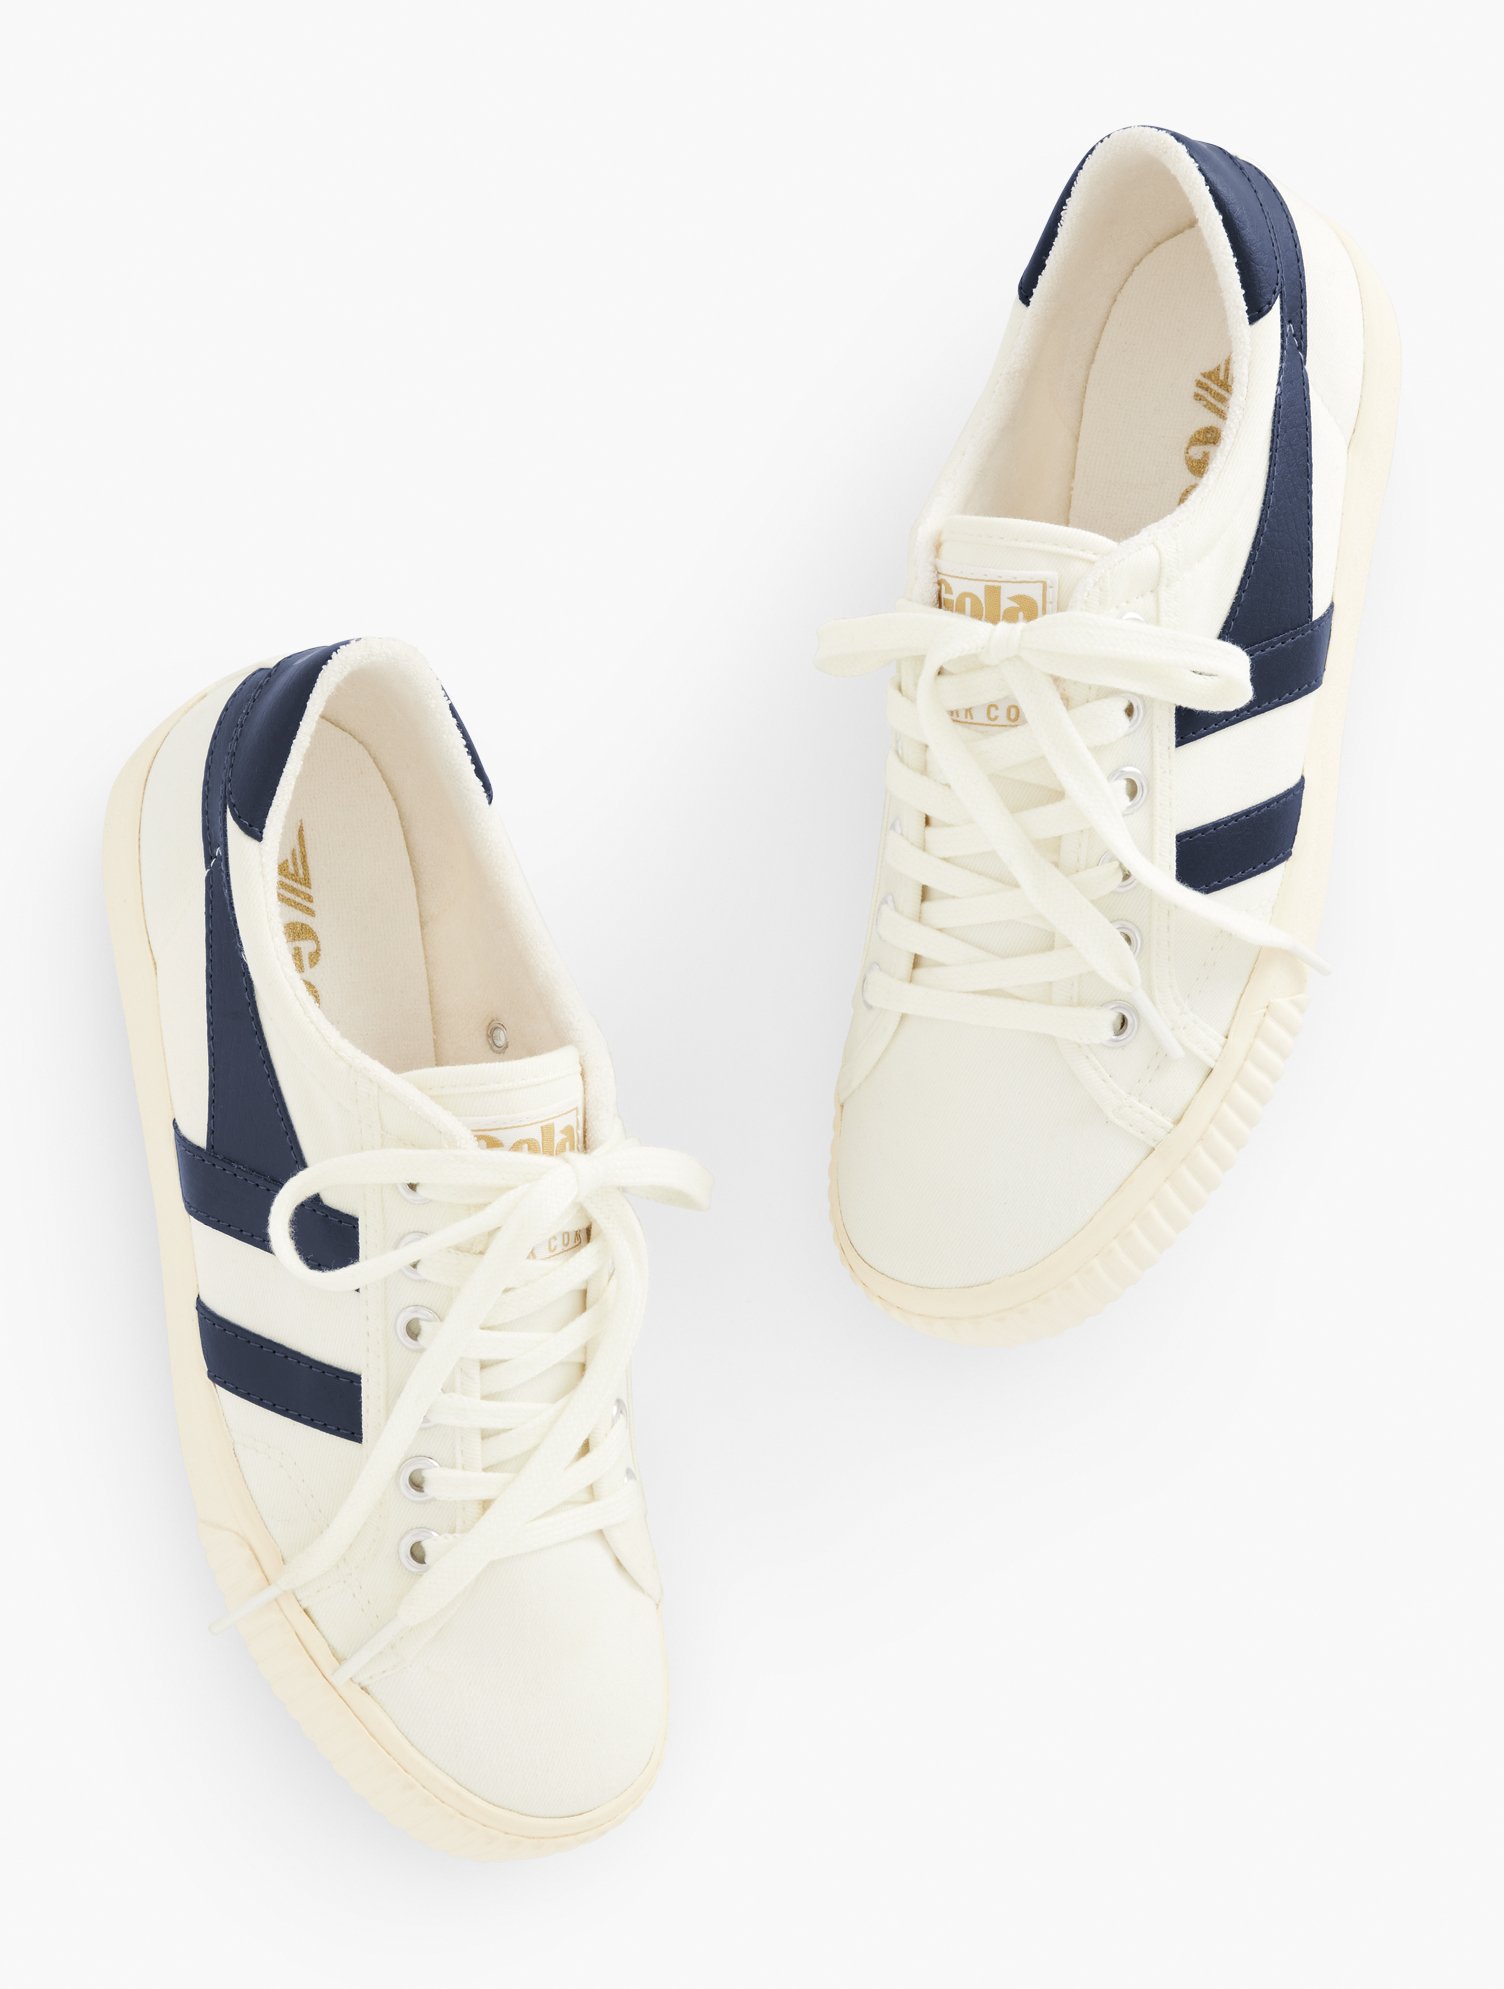 Talbots Golaâ® Mark Cox Tennis Sneakers - Off White/navy Blue - 9m - 100% Cotton  In Off White,navy Blue